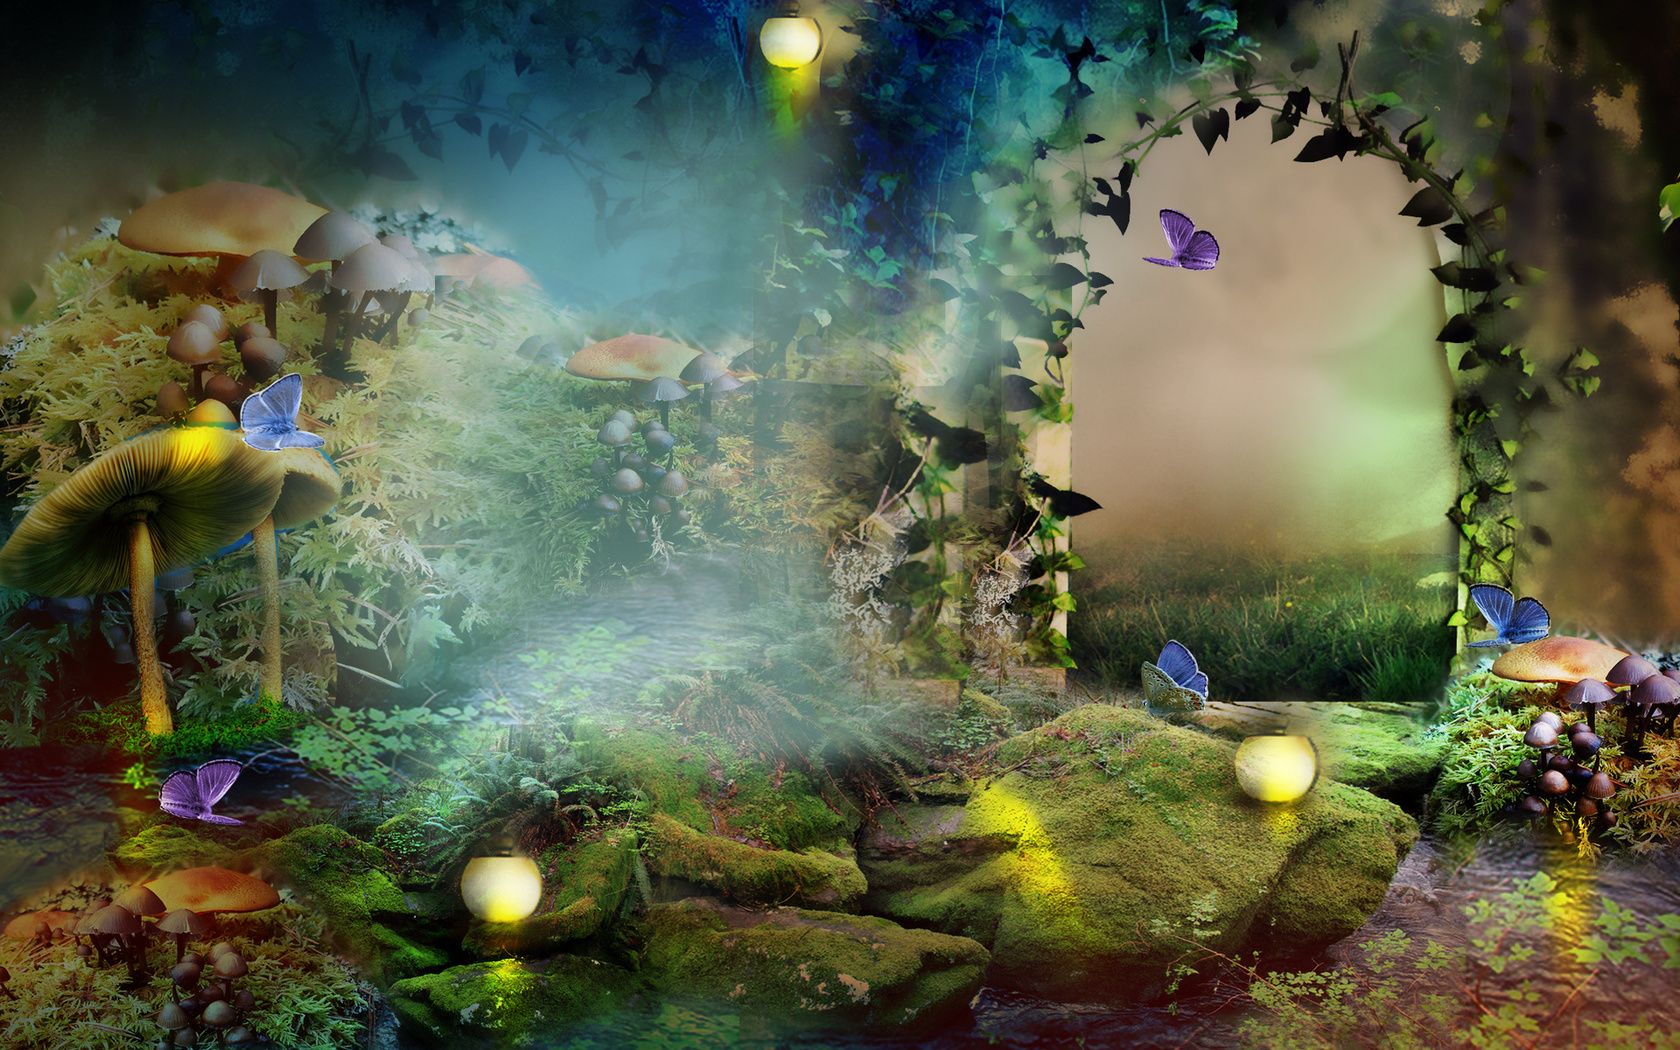 The Enchanted Forest Widescreen Wallpaper